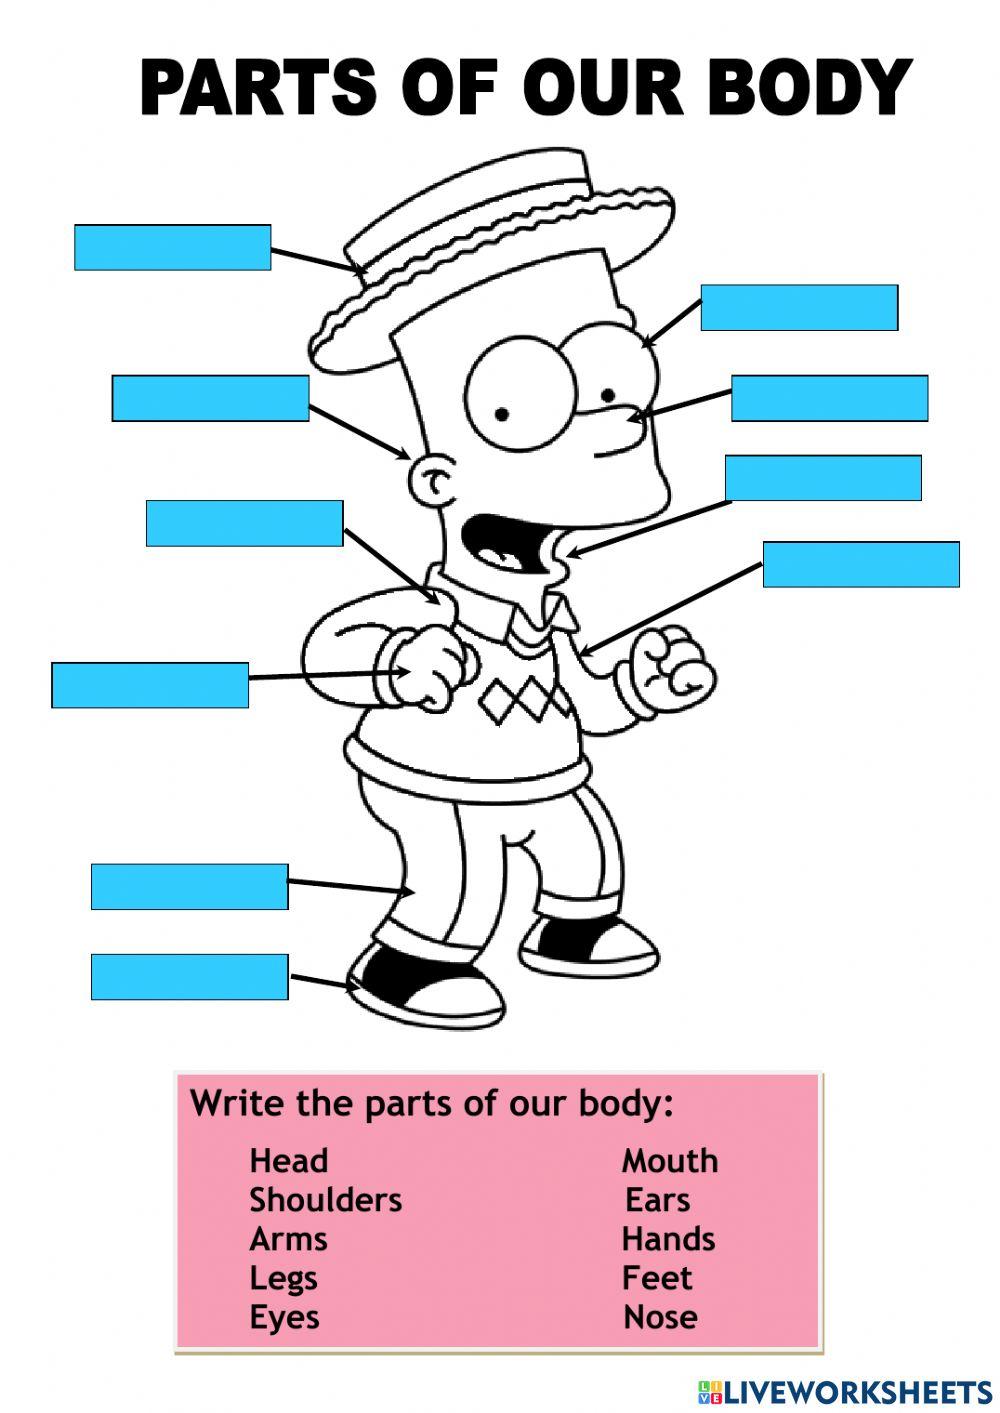 Parts of Our Body interactive activity | Live Worksheets